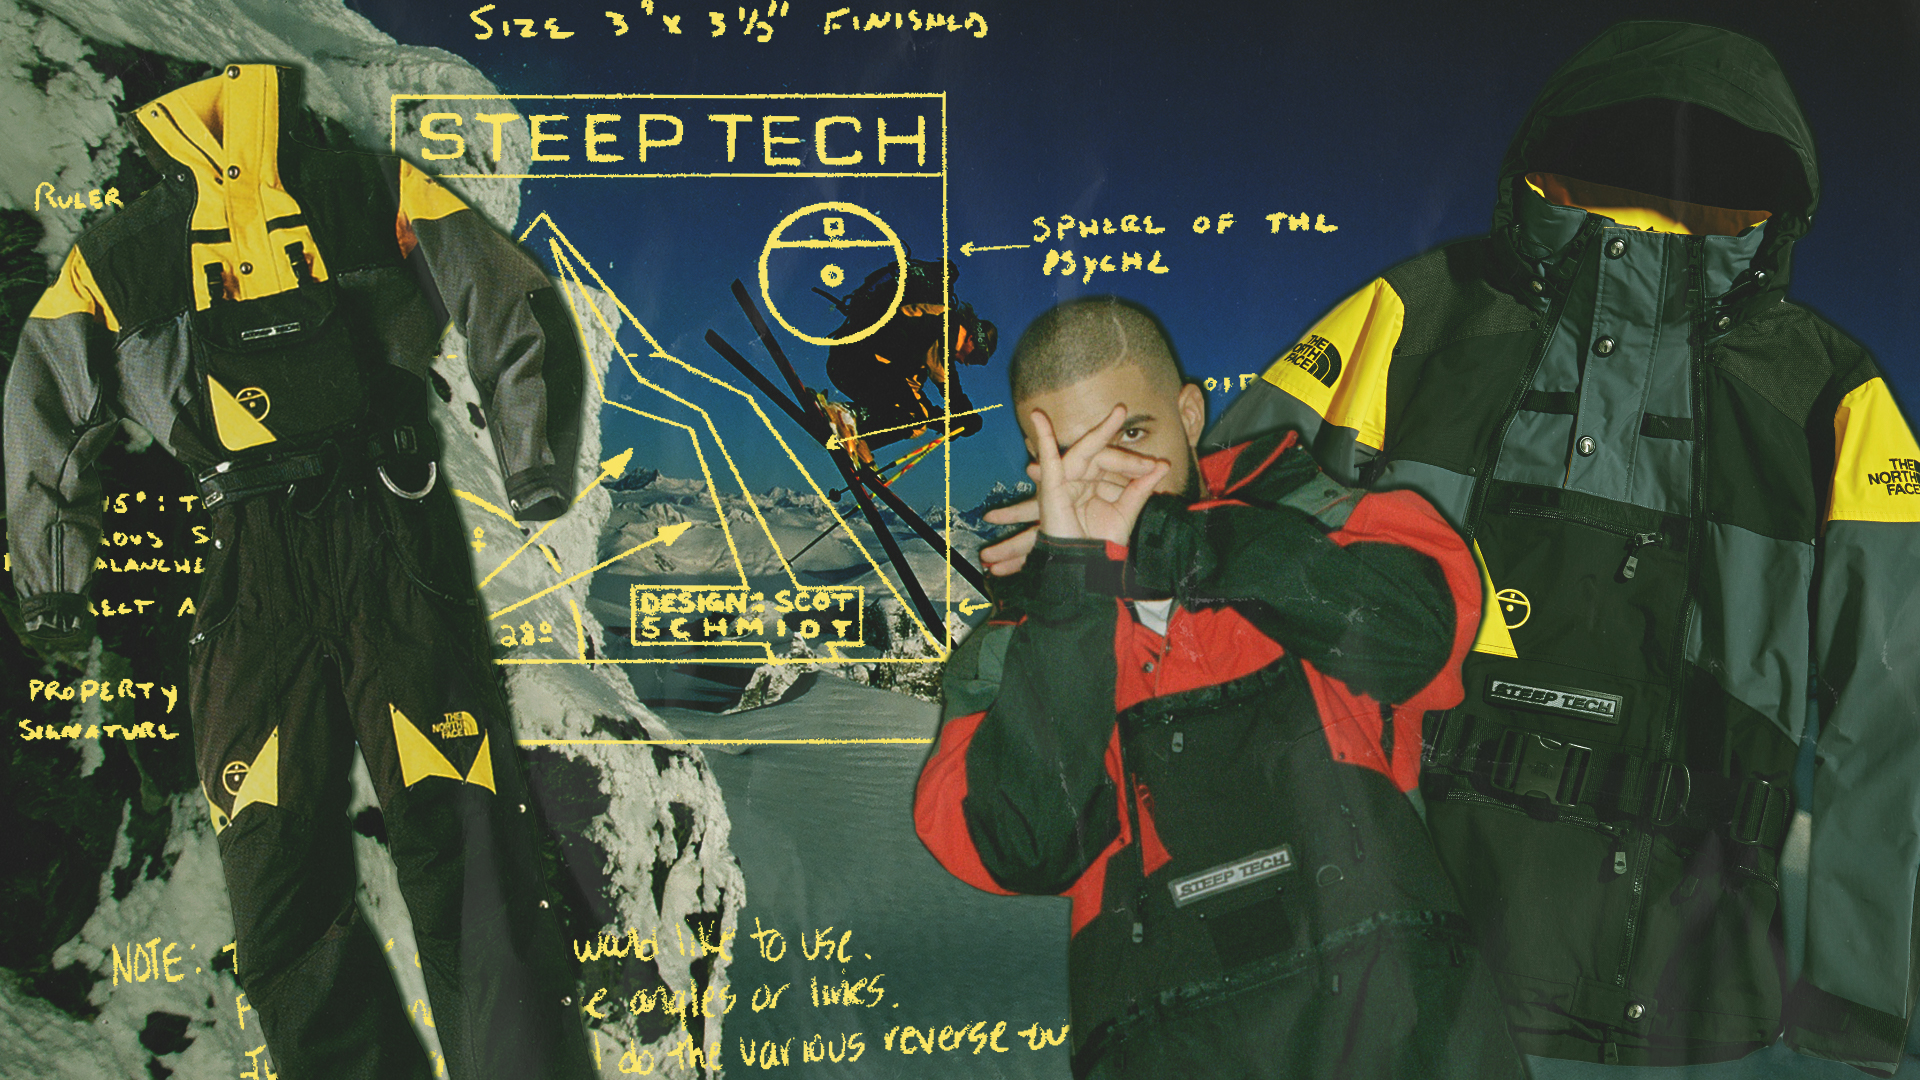 The Story Behind The North Face Steep Tech, The Collection That